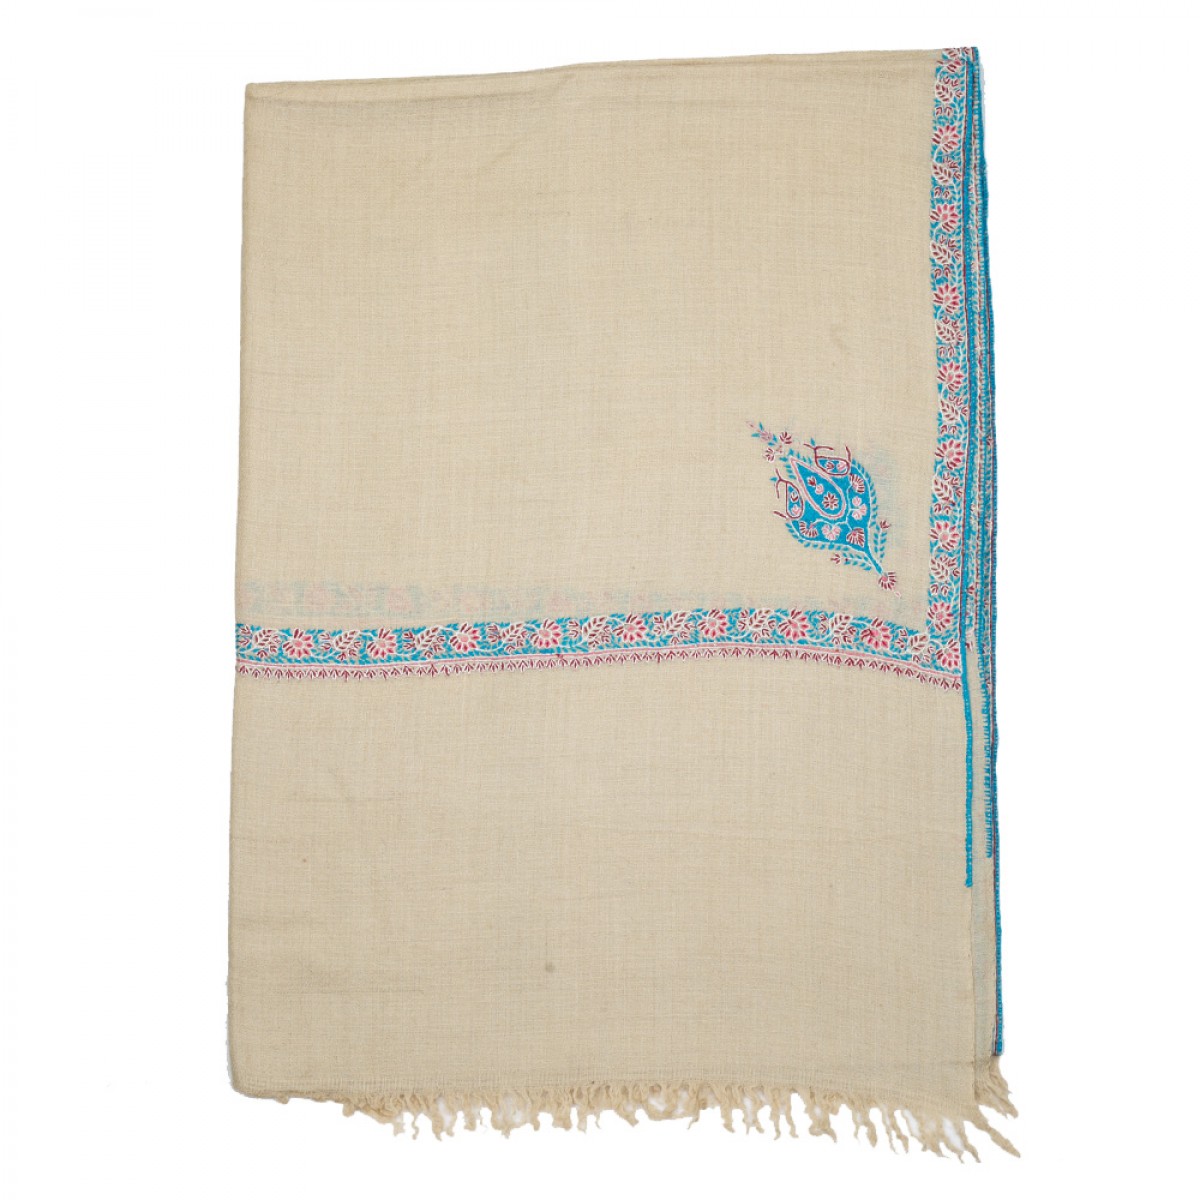 Embroidered Pashmina Stole - Sand & Turquoise